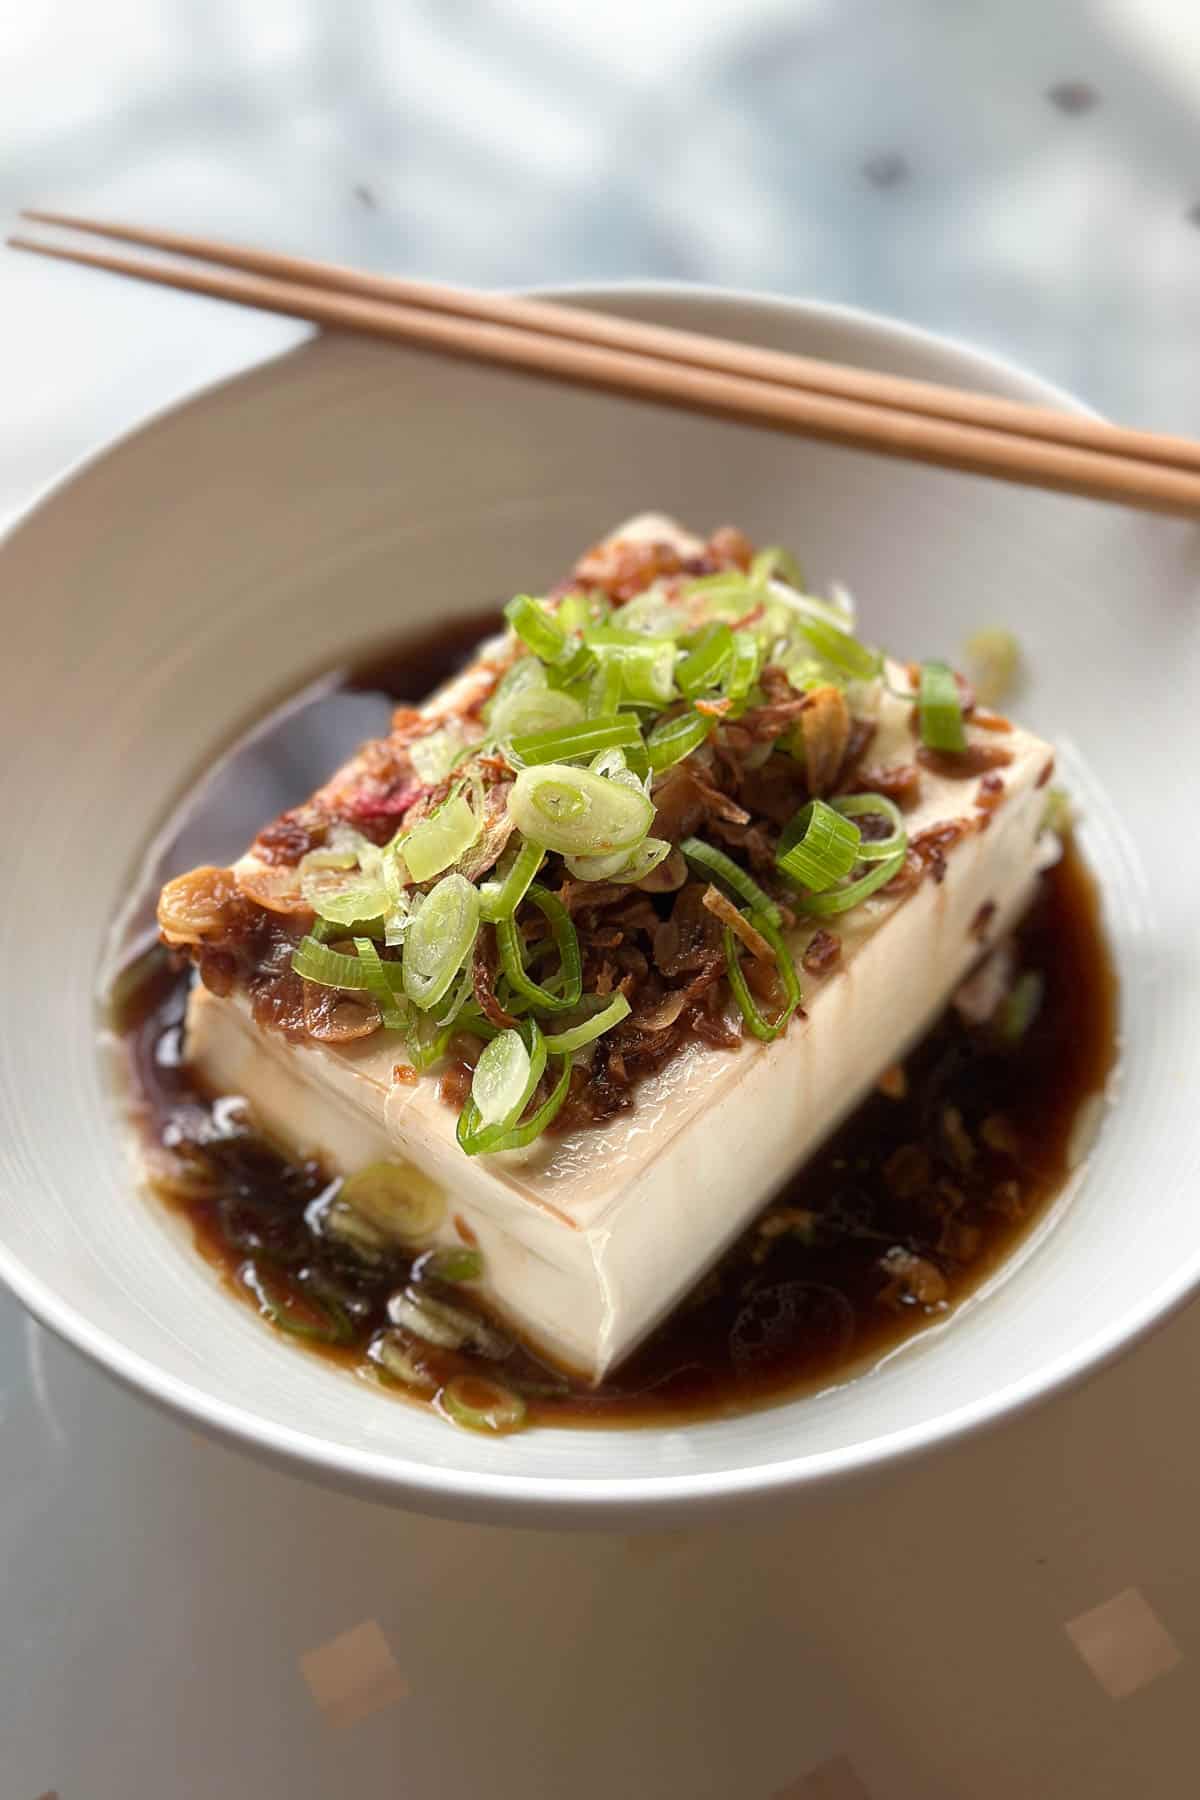 Silken tofu / cold tofu, plated and ready to eat.